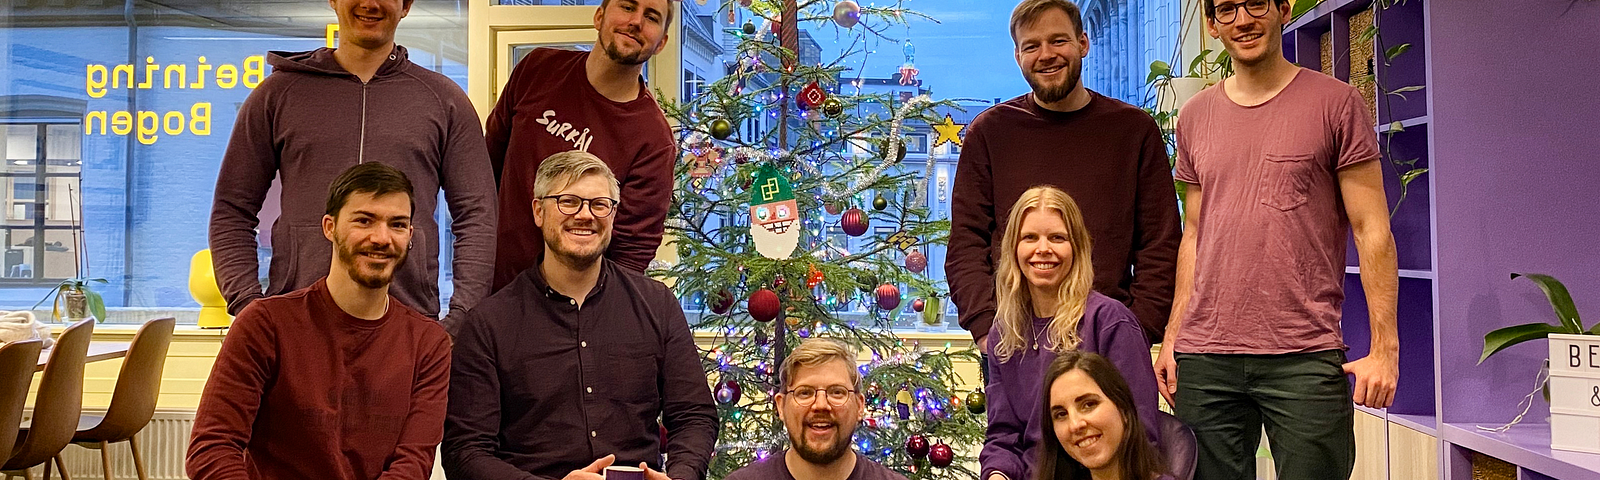 The Beining & Bogen team posing in front of a christmas tree at the office.